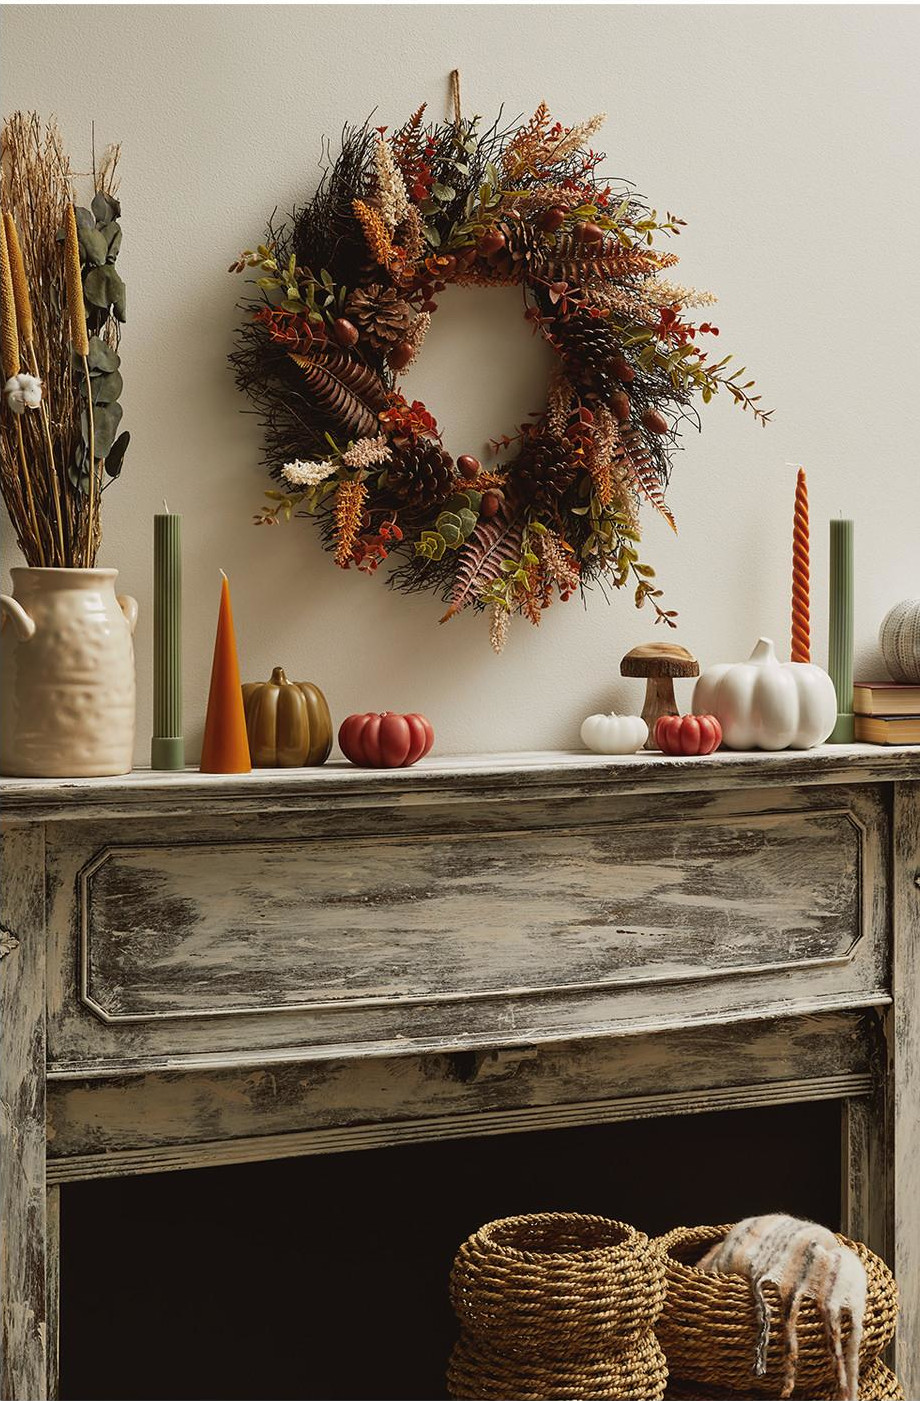 Primark Home New arrivals Autumn wreath for the living room Dried plants